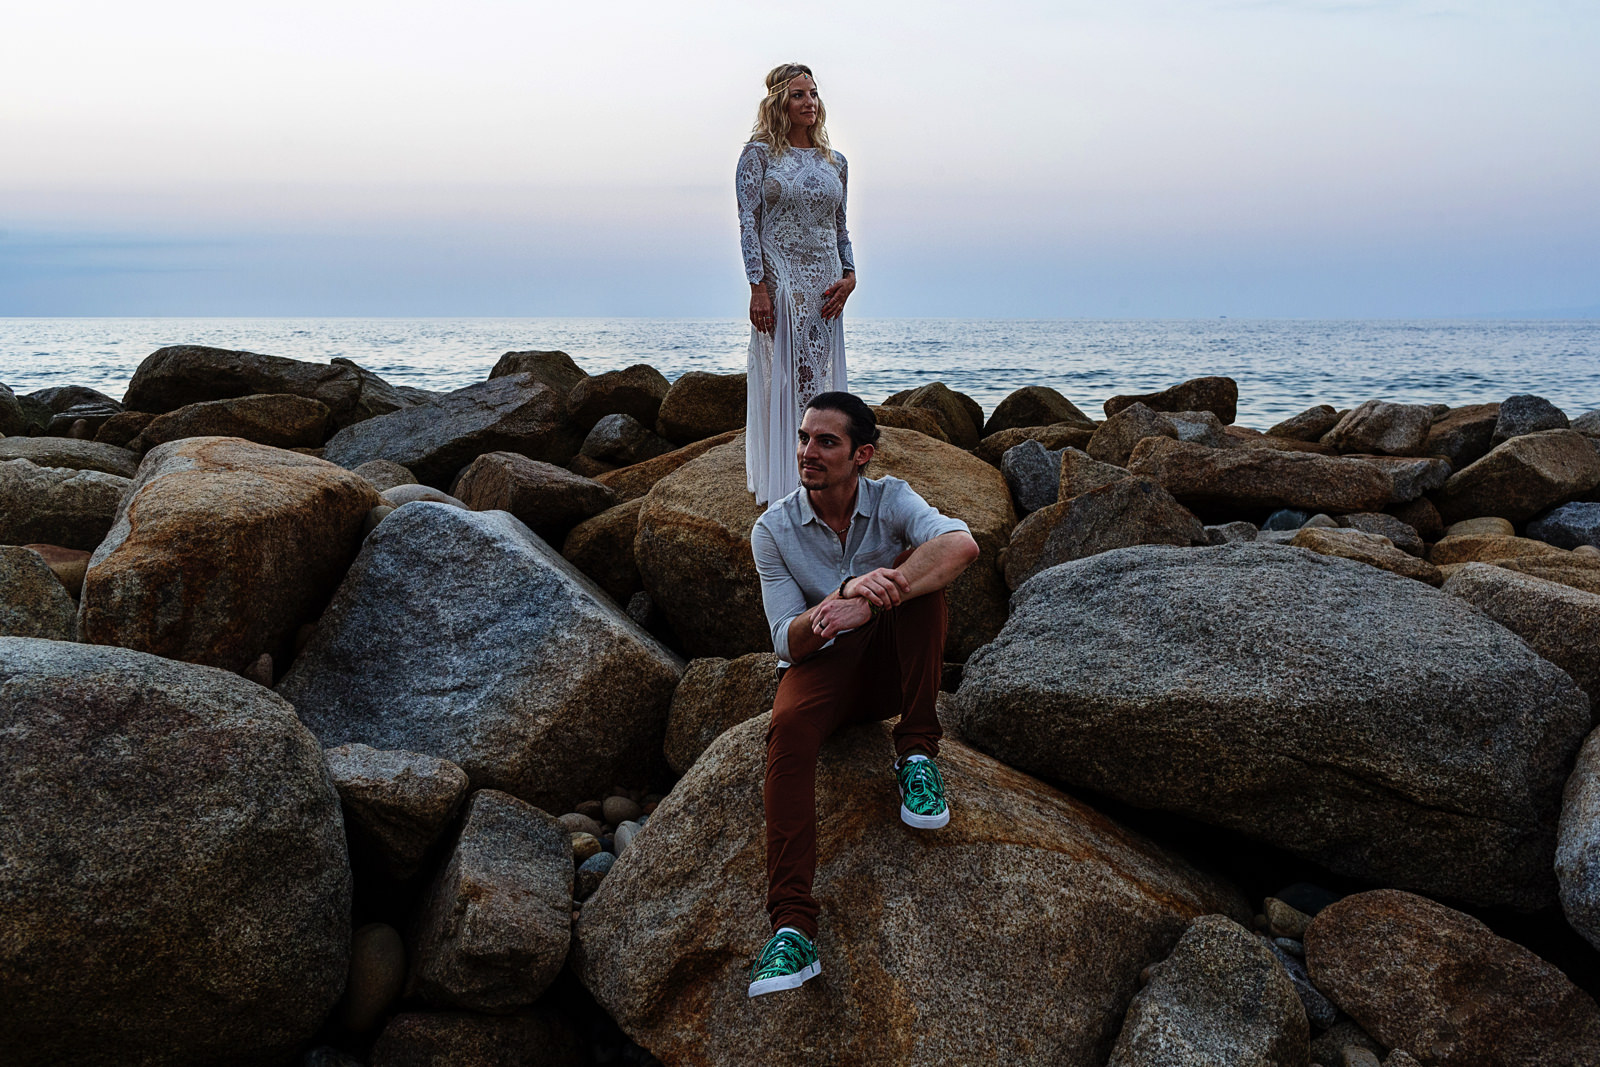 Wedding couple portrait, bride standing in the rocks while the groom is sitting on the rocks with the Mexican pacific ocean in the background